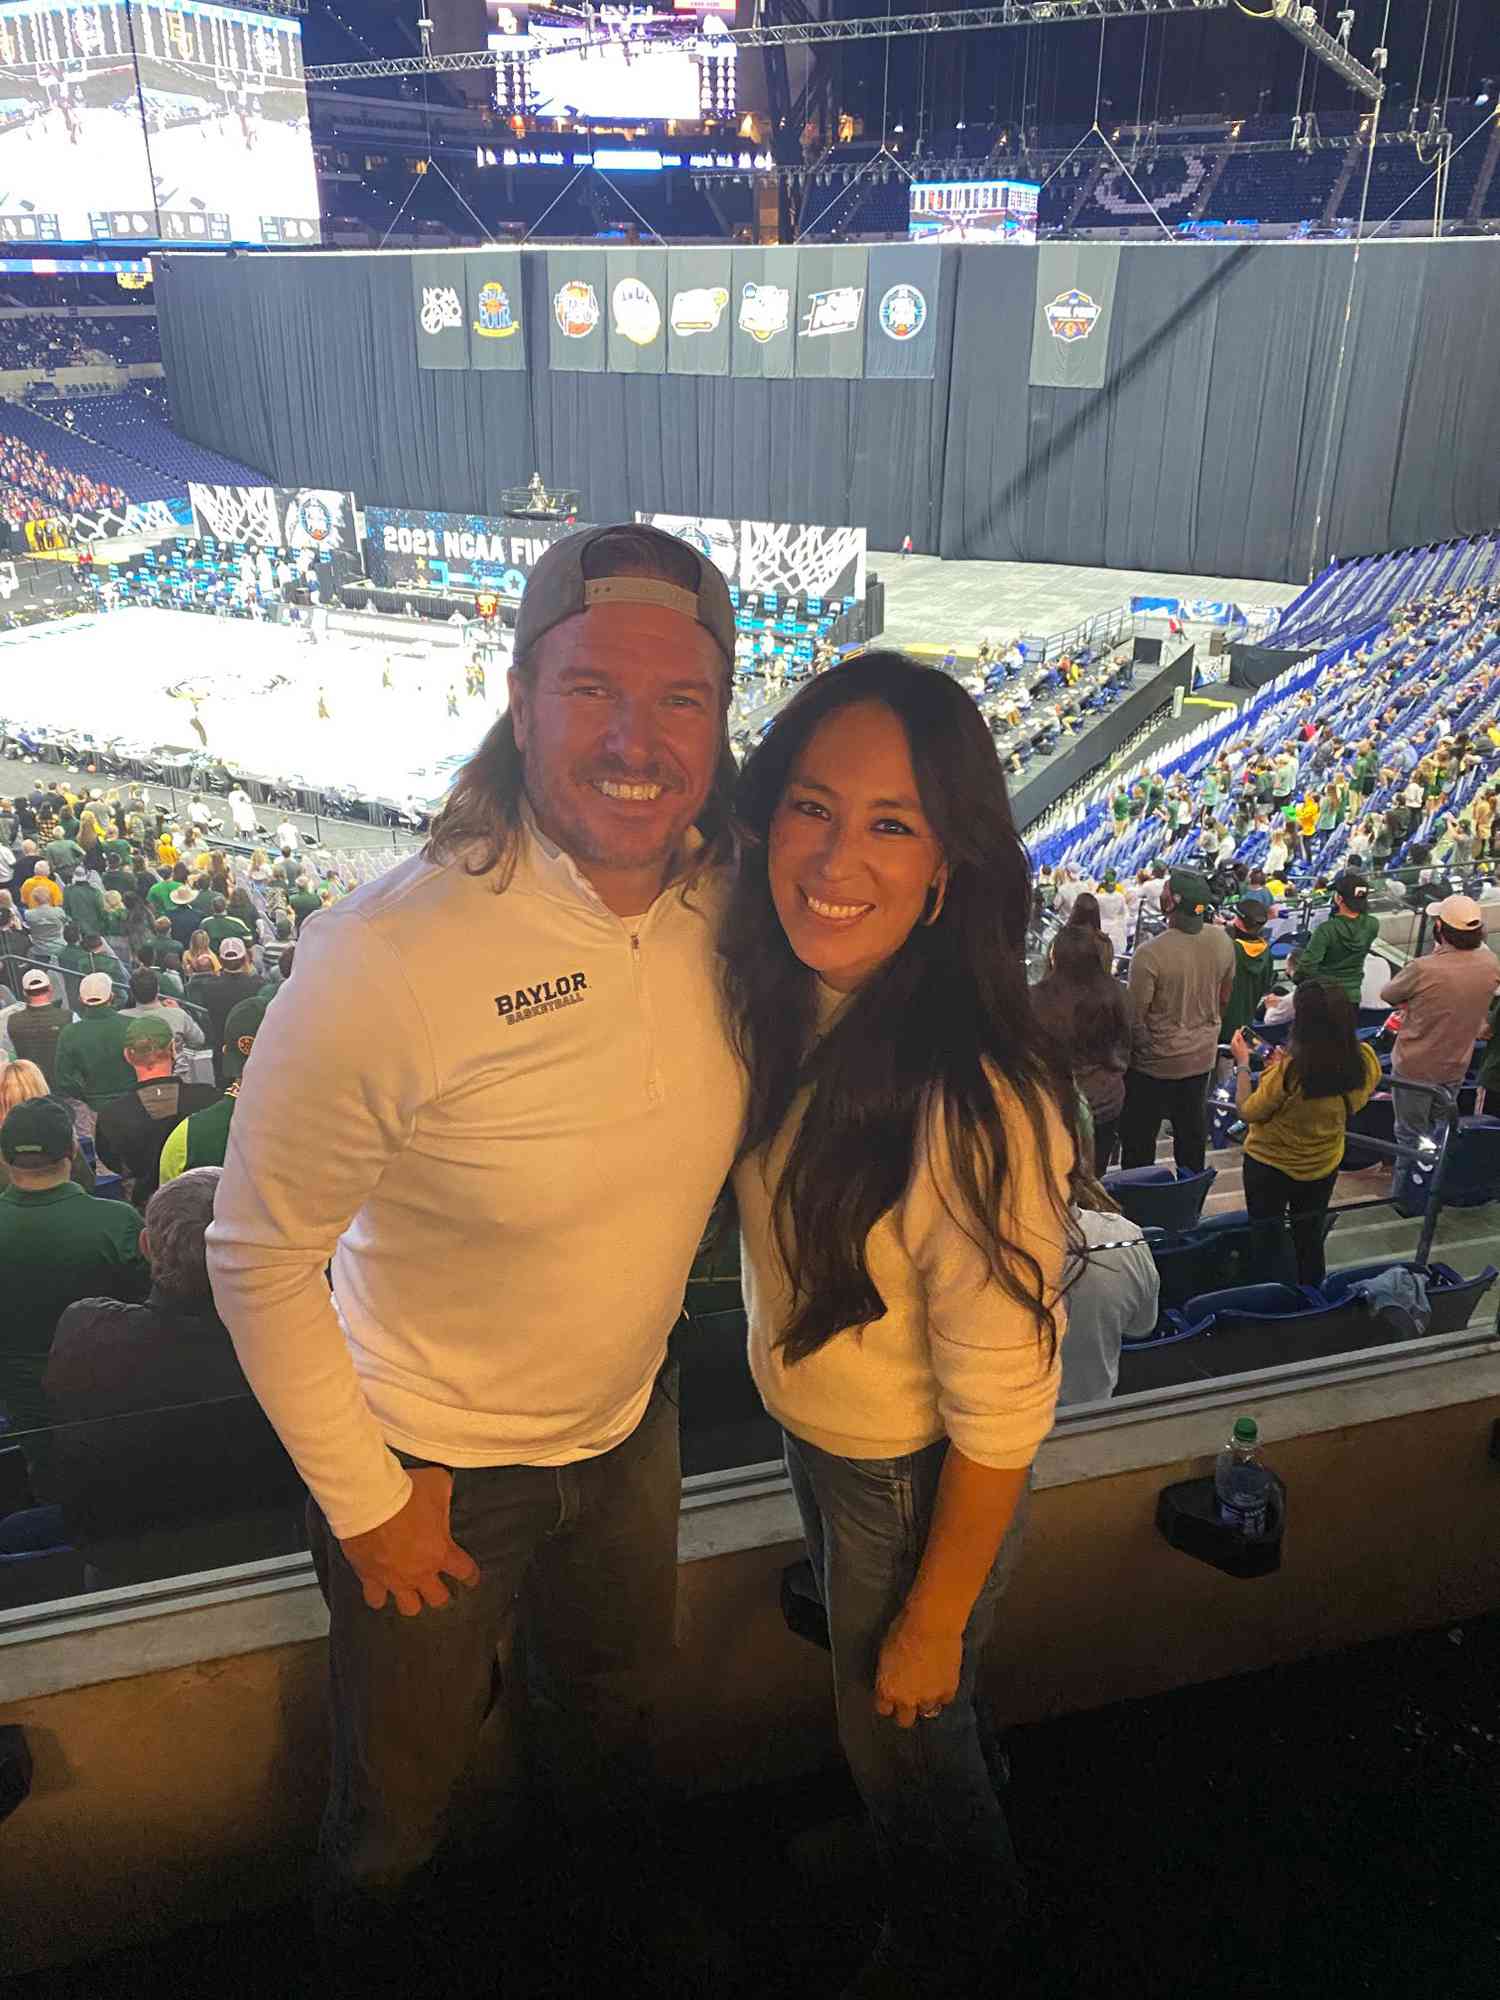 Chop and Joanna Gaines at Baylor University